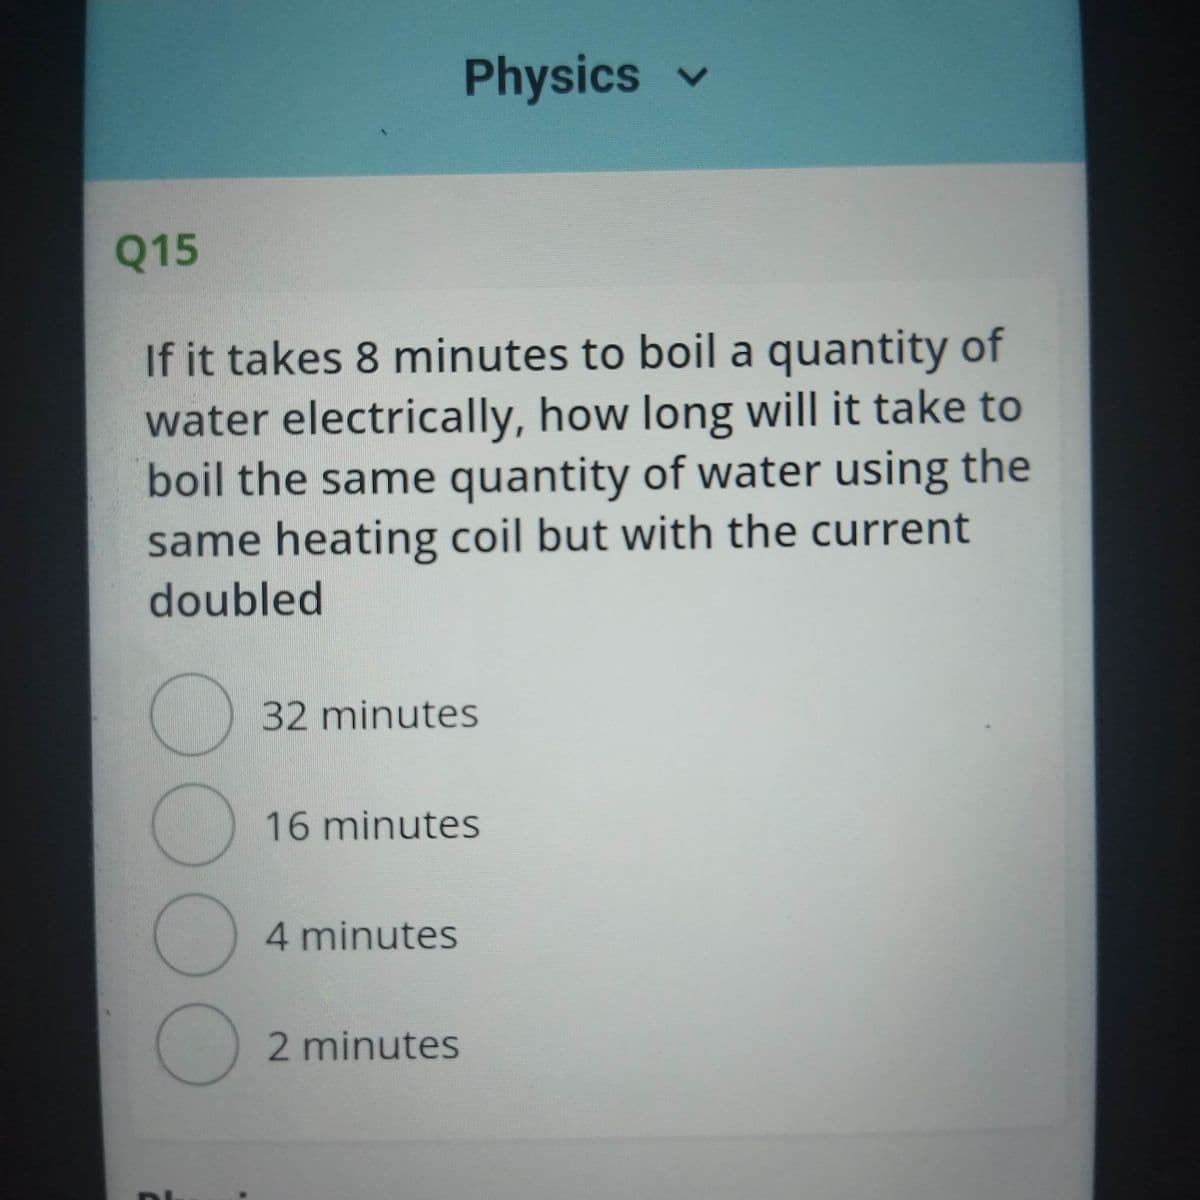 Physics v
Q15
If it takes 8 minutes to boil a quantity of
water electrically, how long will it take to
boil the same quantity of water using the
same heating coil but with the current
doubled
32minutes
16 minutes
4 minutes
2 minutes
